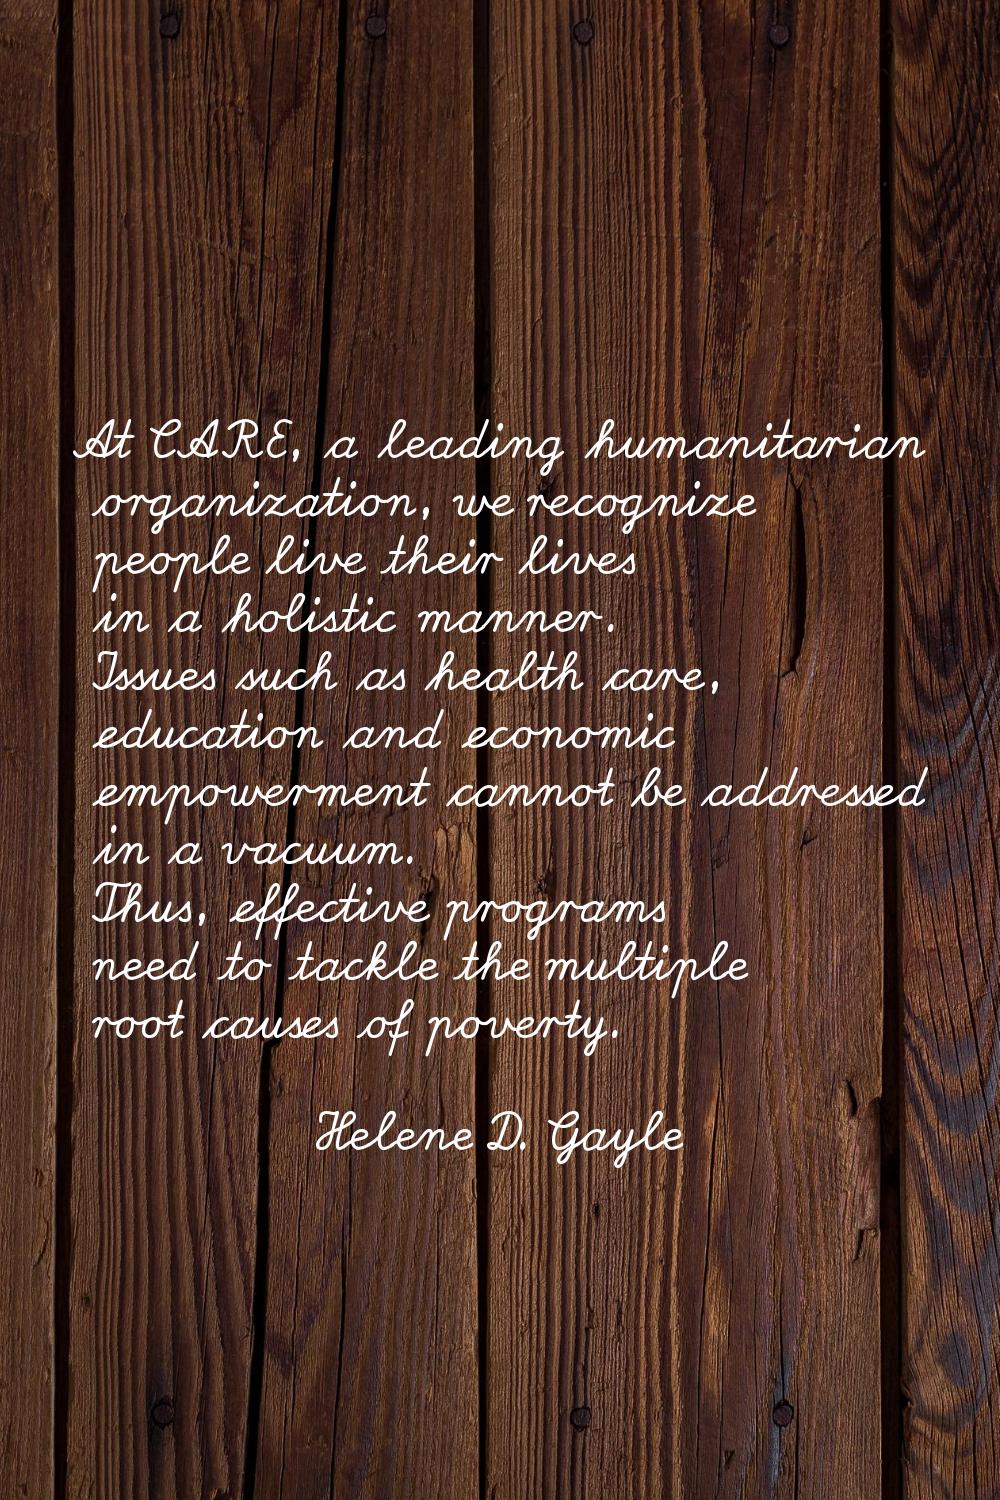 At CARE, a leading humanitarian organization, we recognize people live their lives in a holistic ma